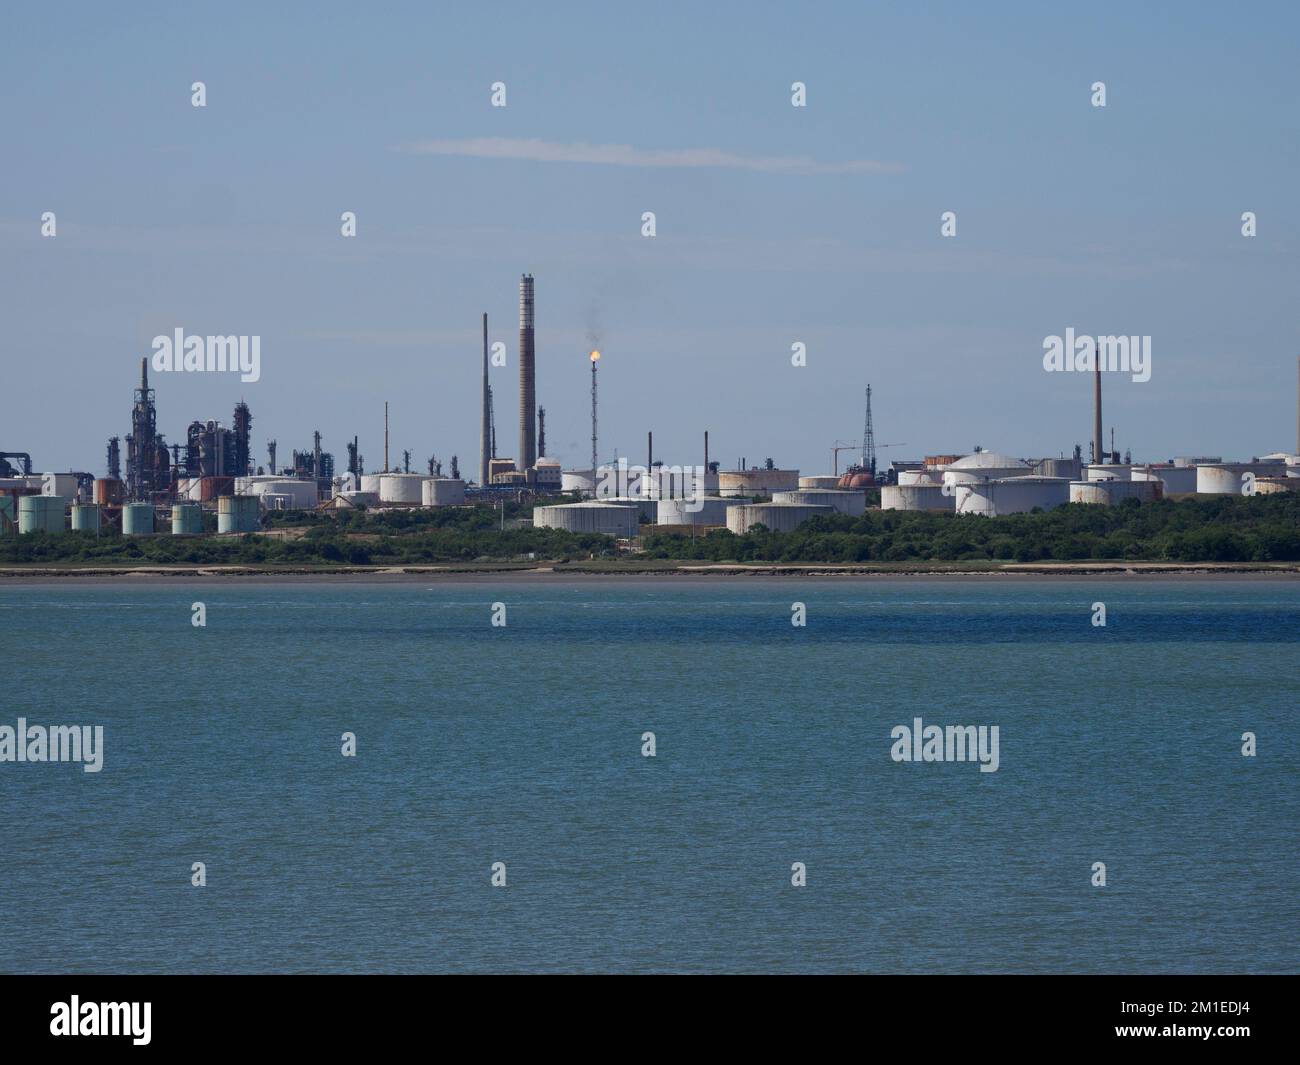 Esso Fawley Oil Refinery and Petrochemical Plant, Fawley, Southampton, UK Stock Photo